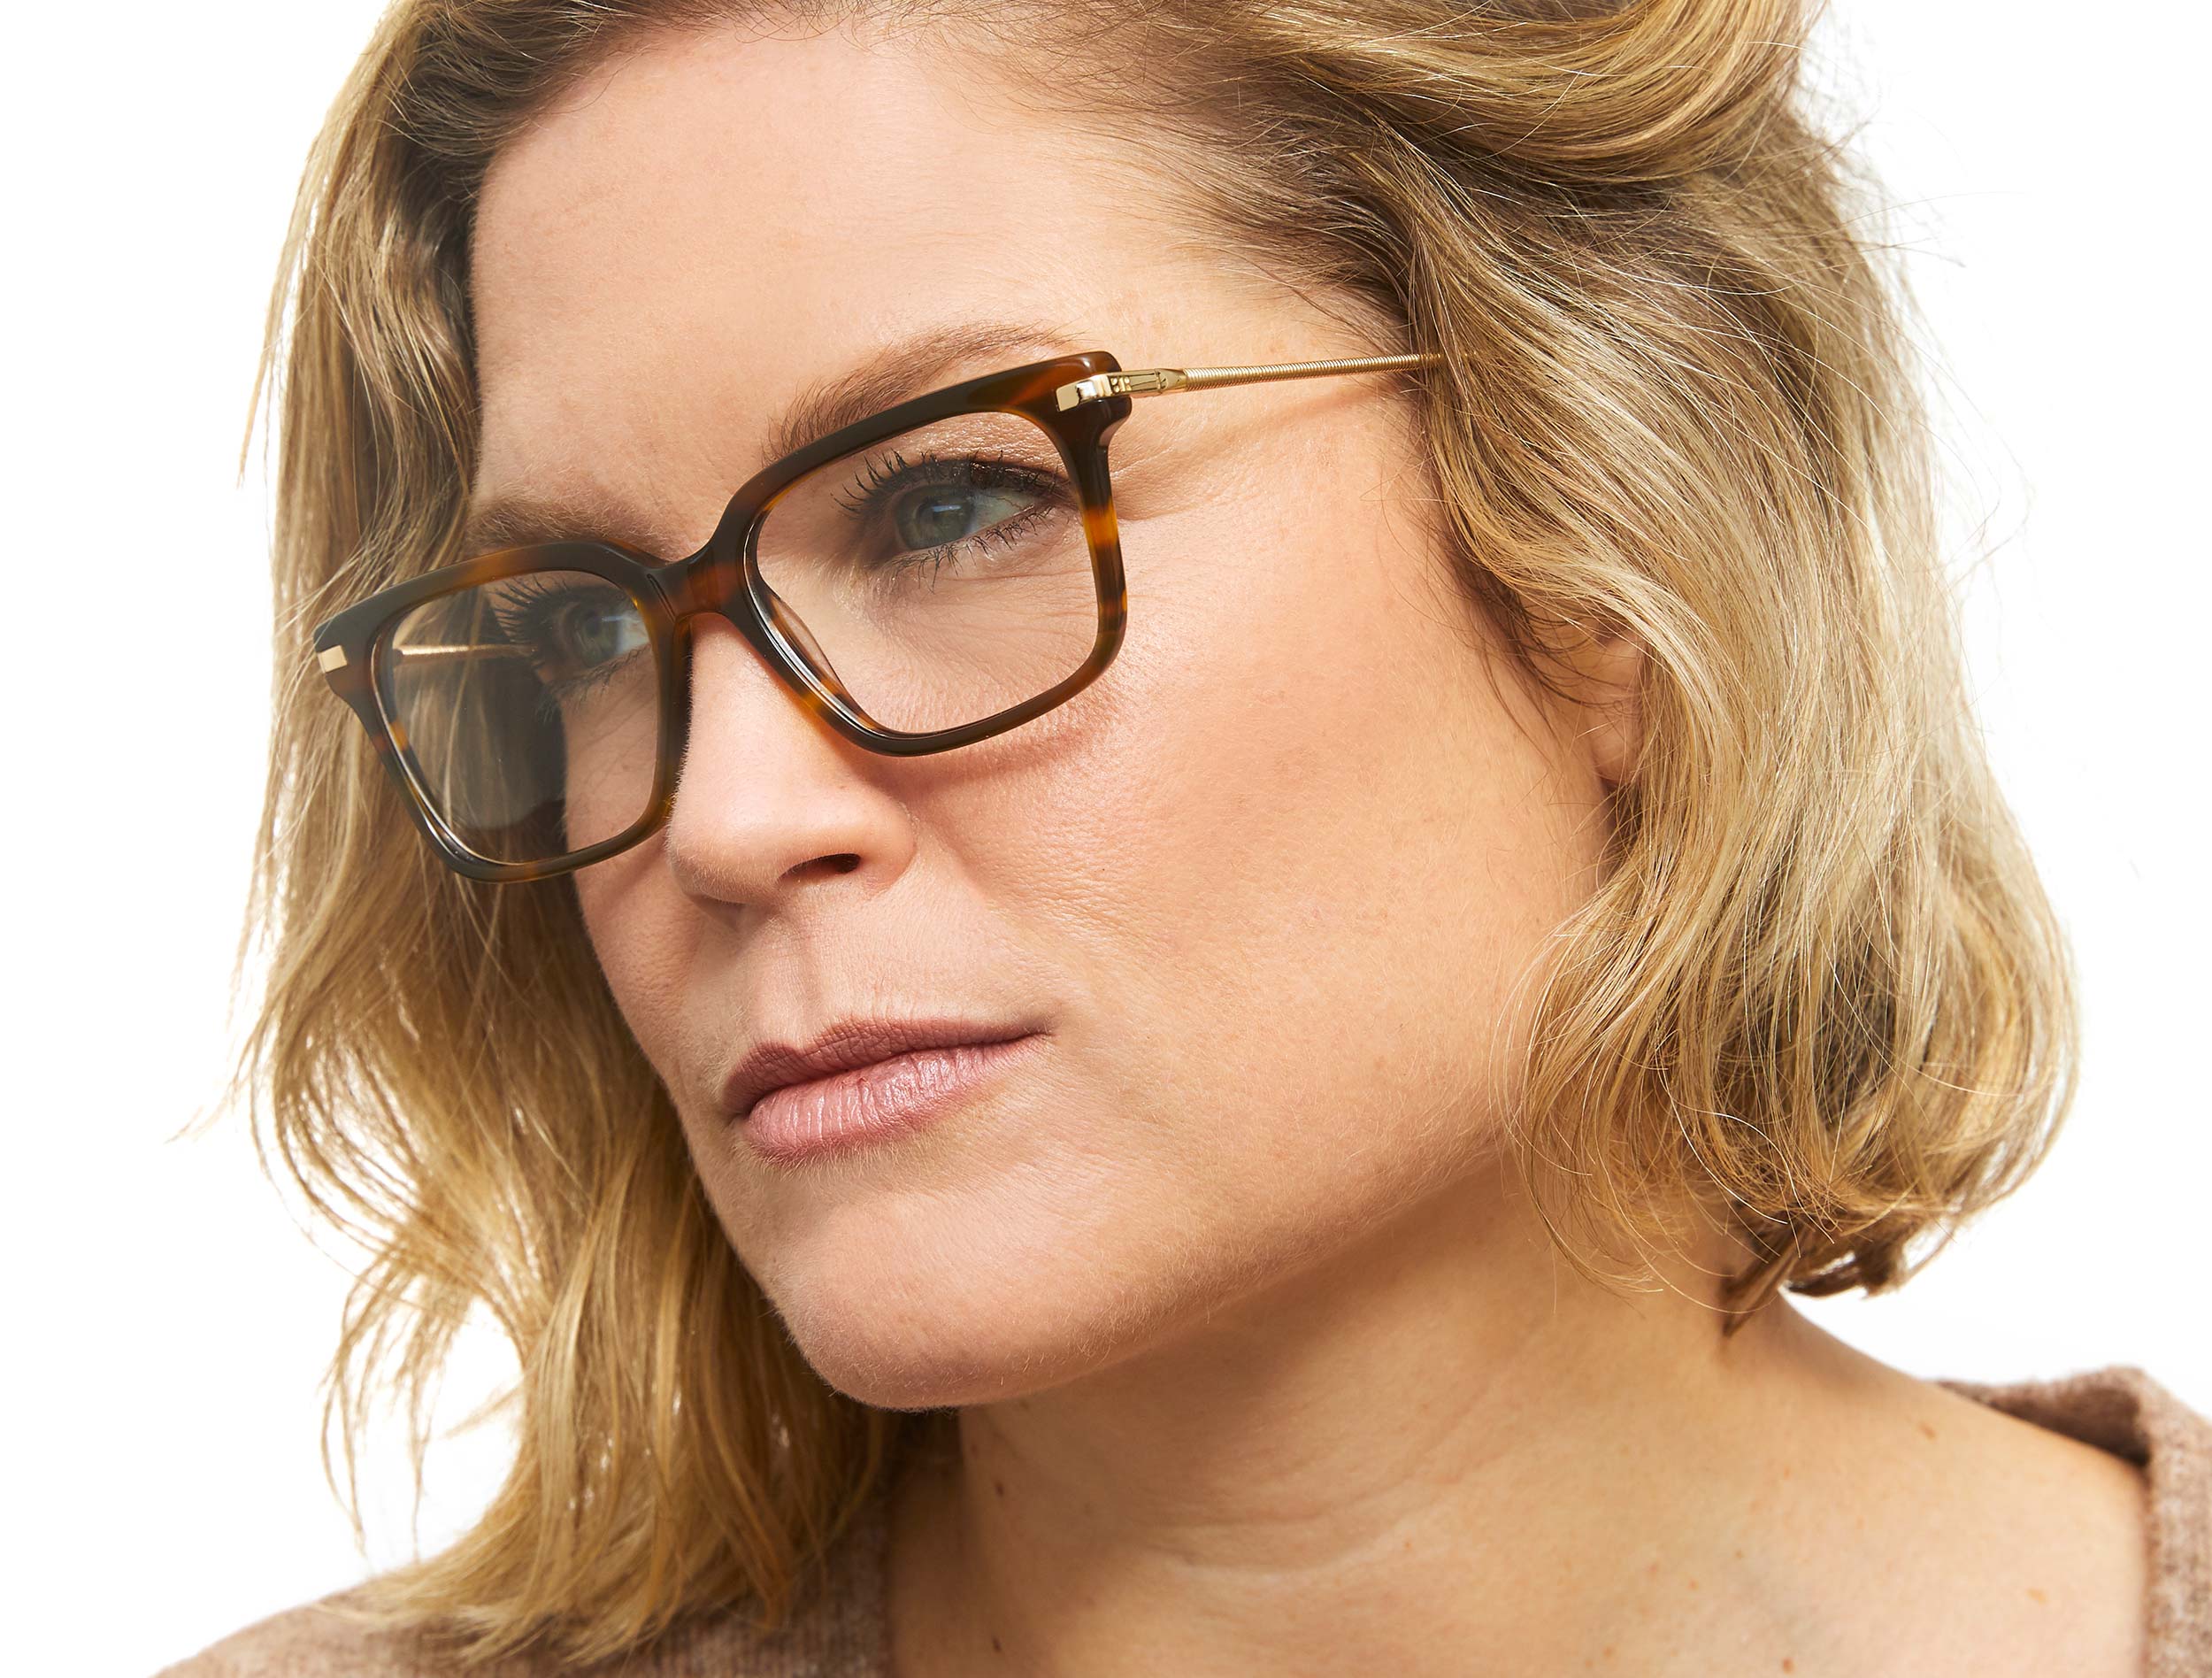 Photo of a man or woman wearing Sasha Black & Gold Reading Glasses by French Kiwis